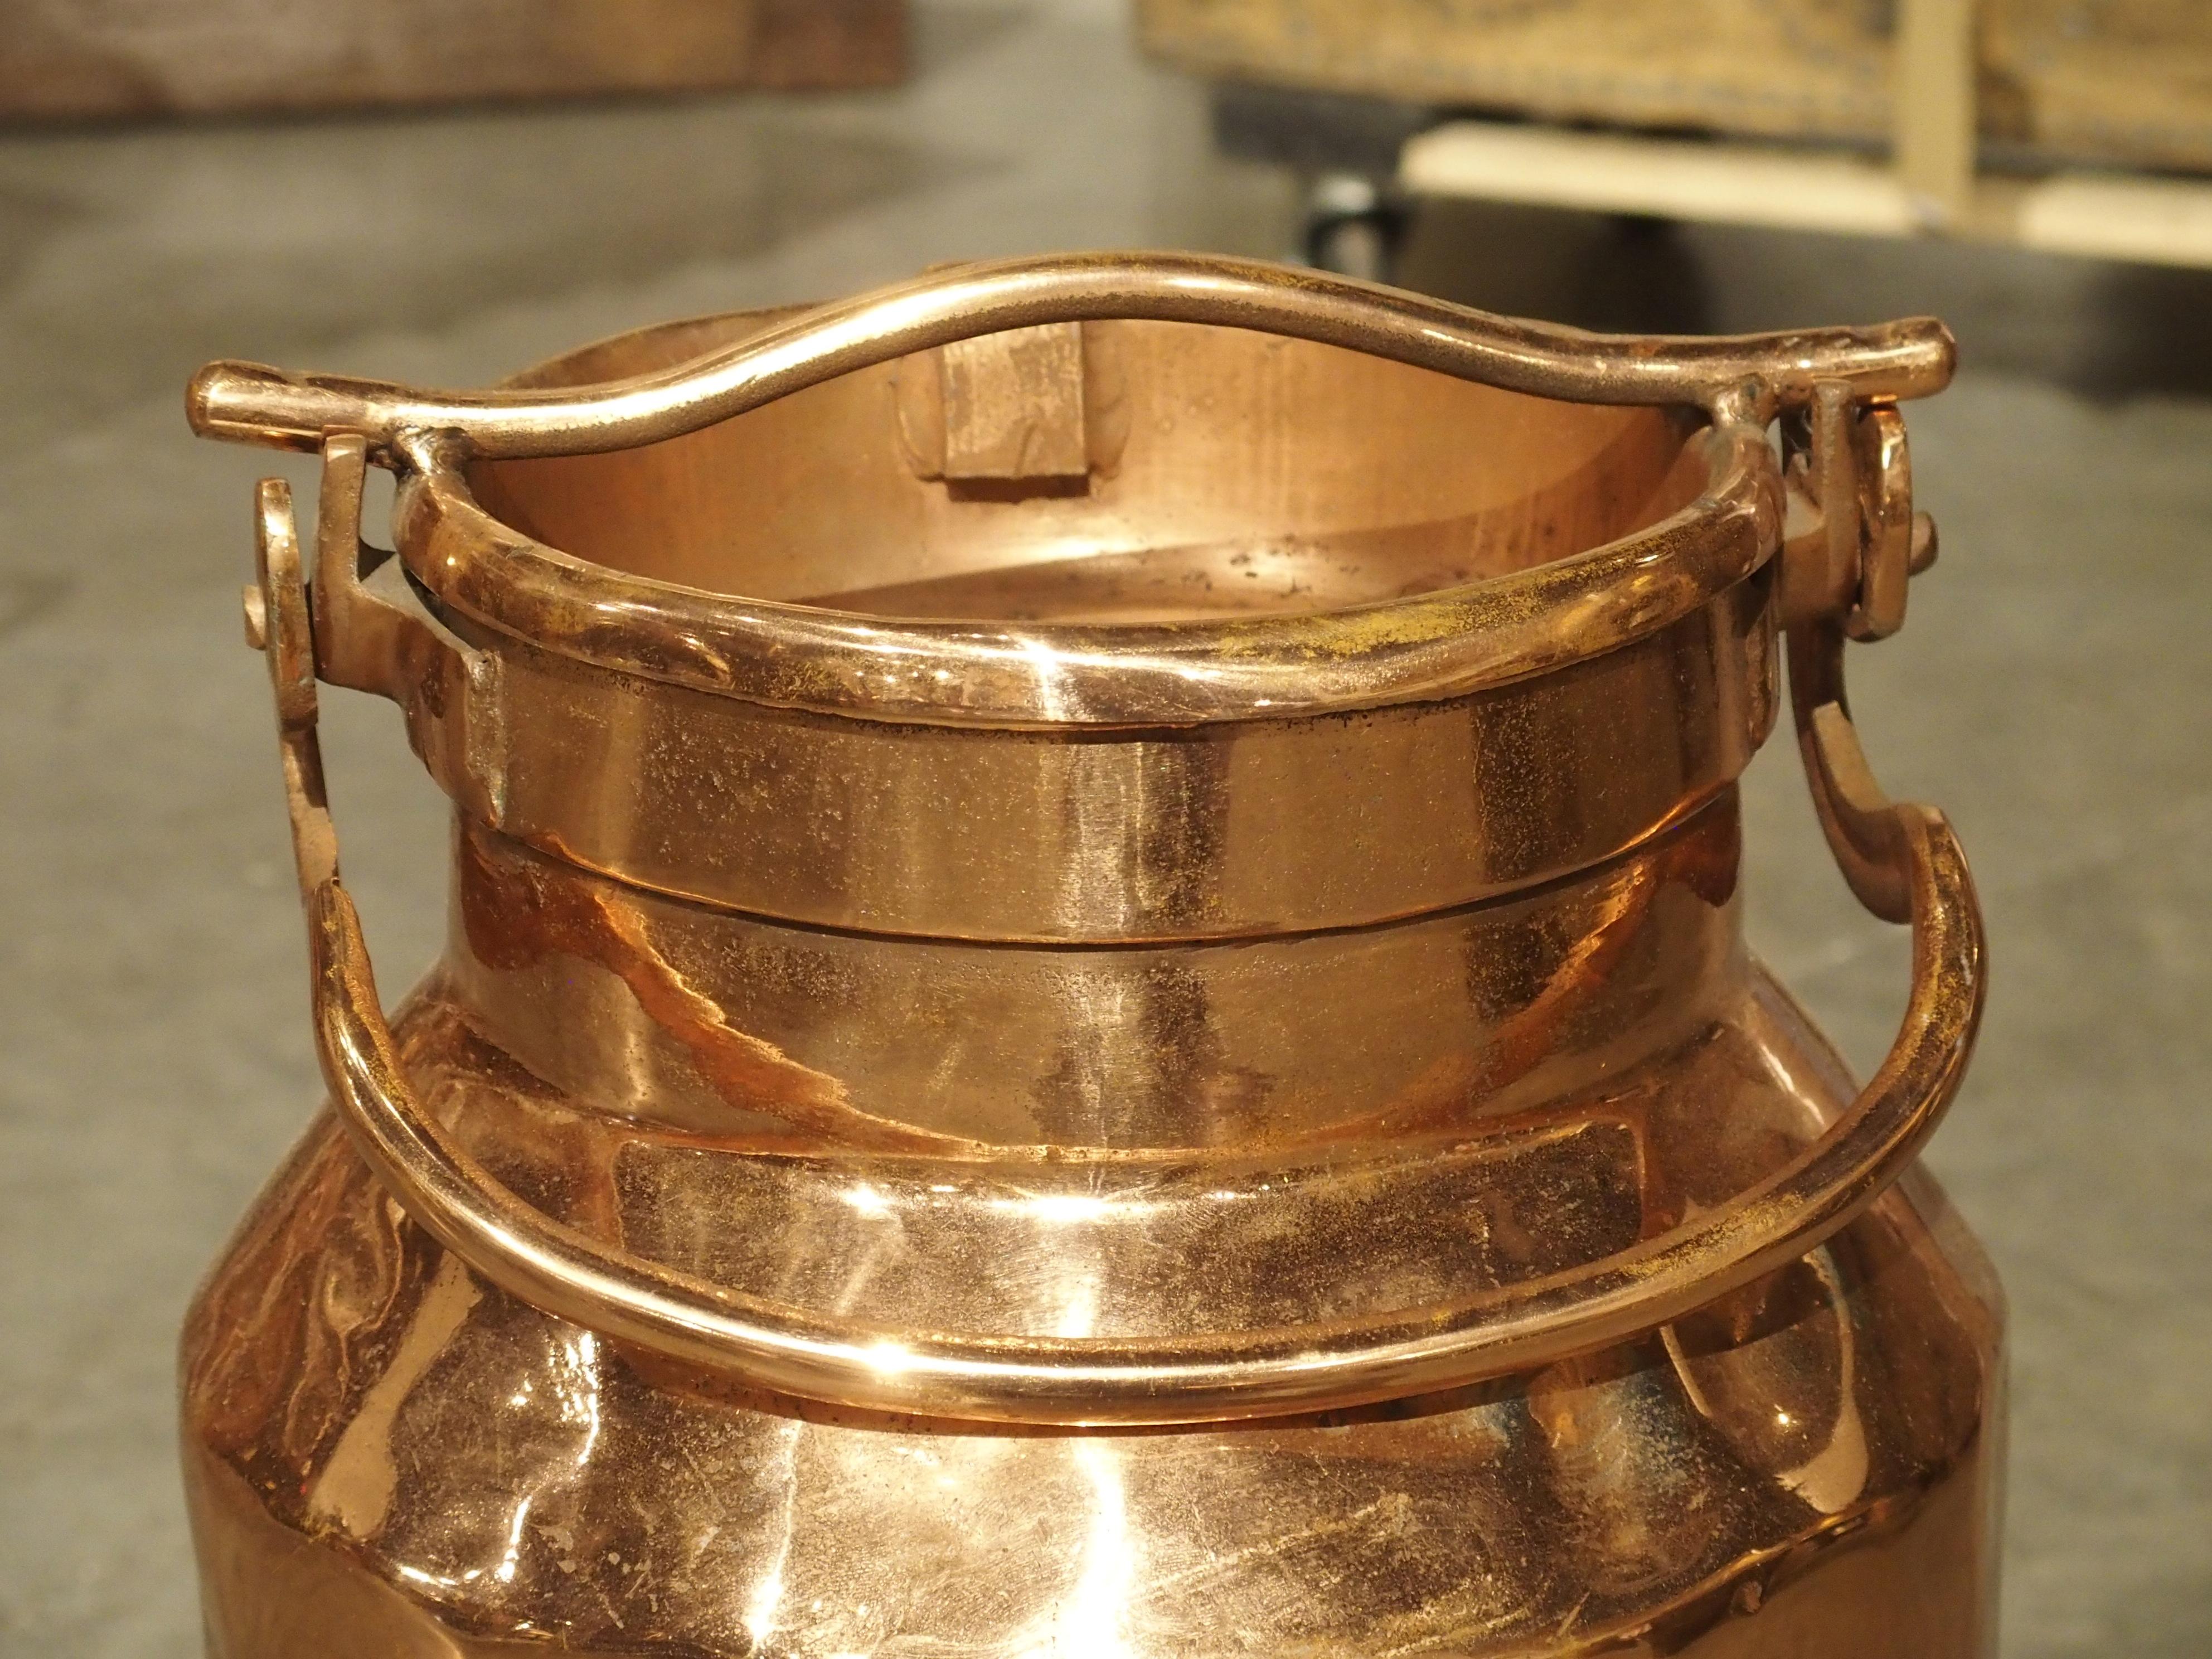 Hand-Crafted Antique French Polished Copper Milk Container, Late 19th Century